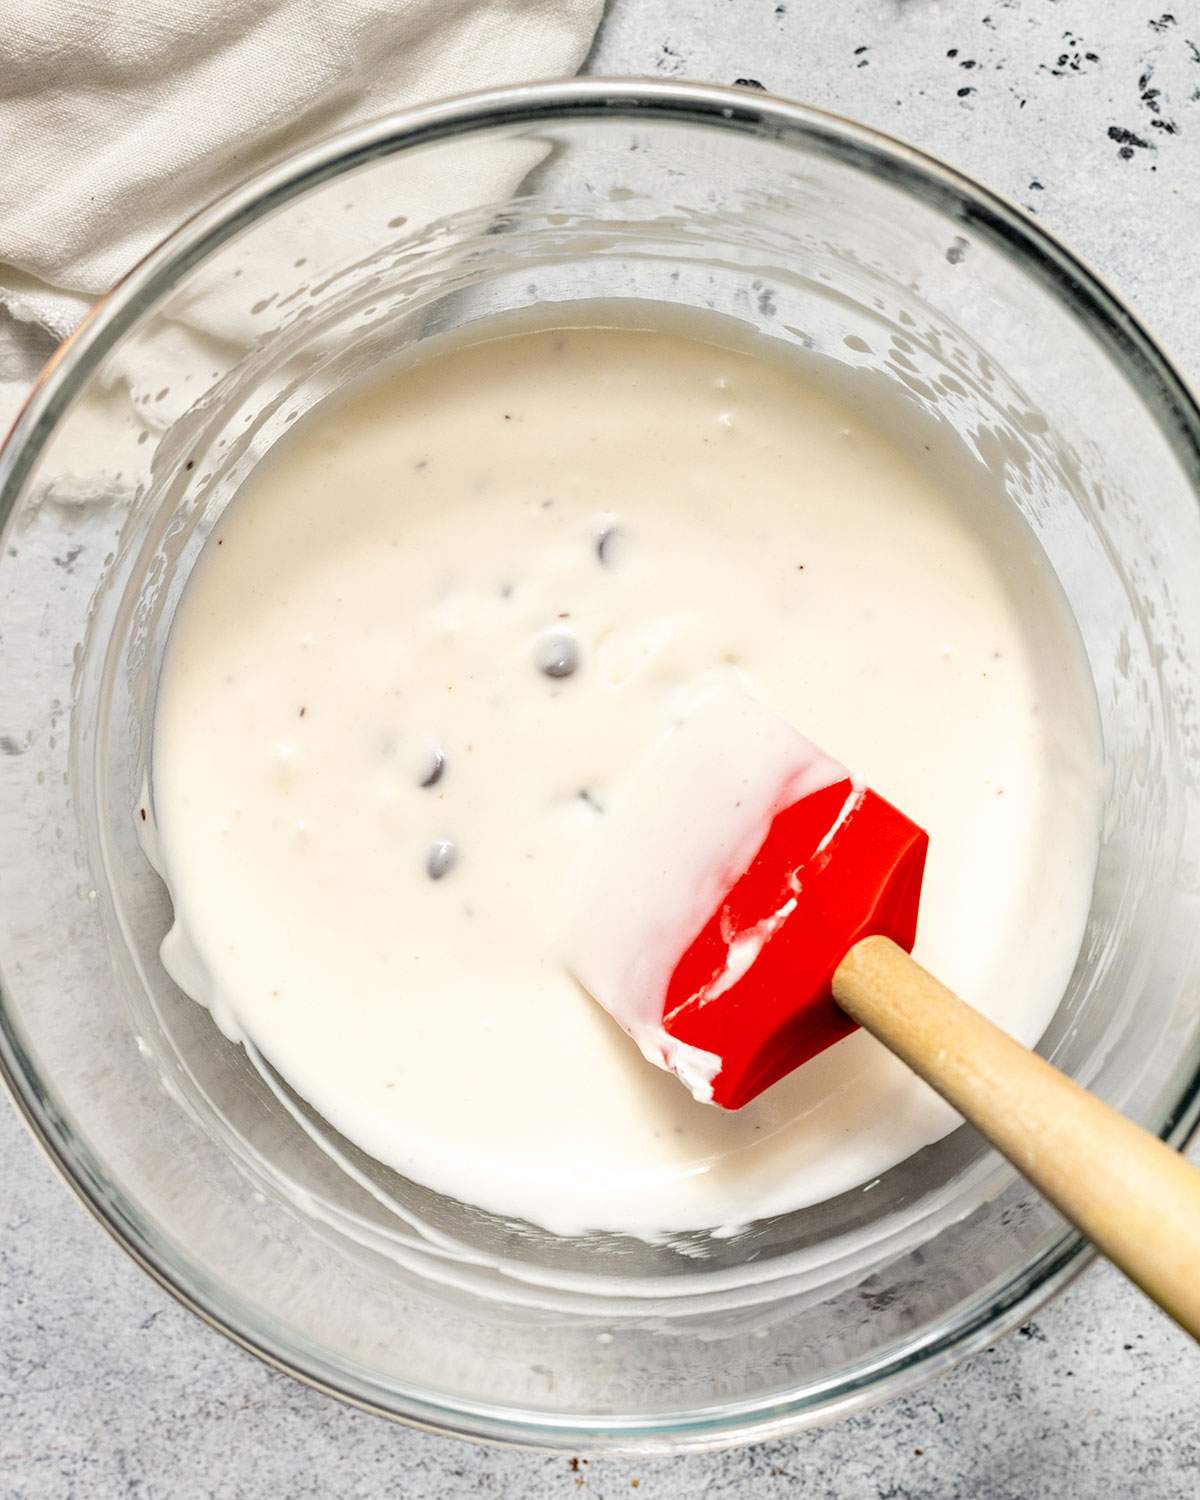 Dark chocolate chips have been folded into the cheesecake mix in a glass bowl with a spatula.